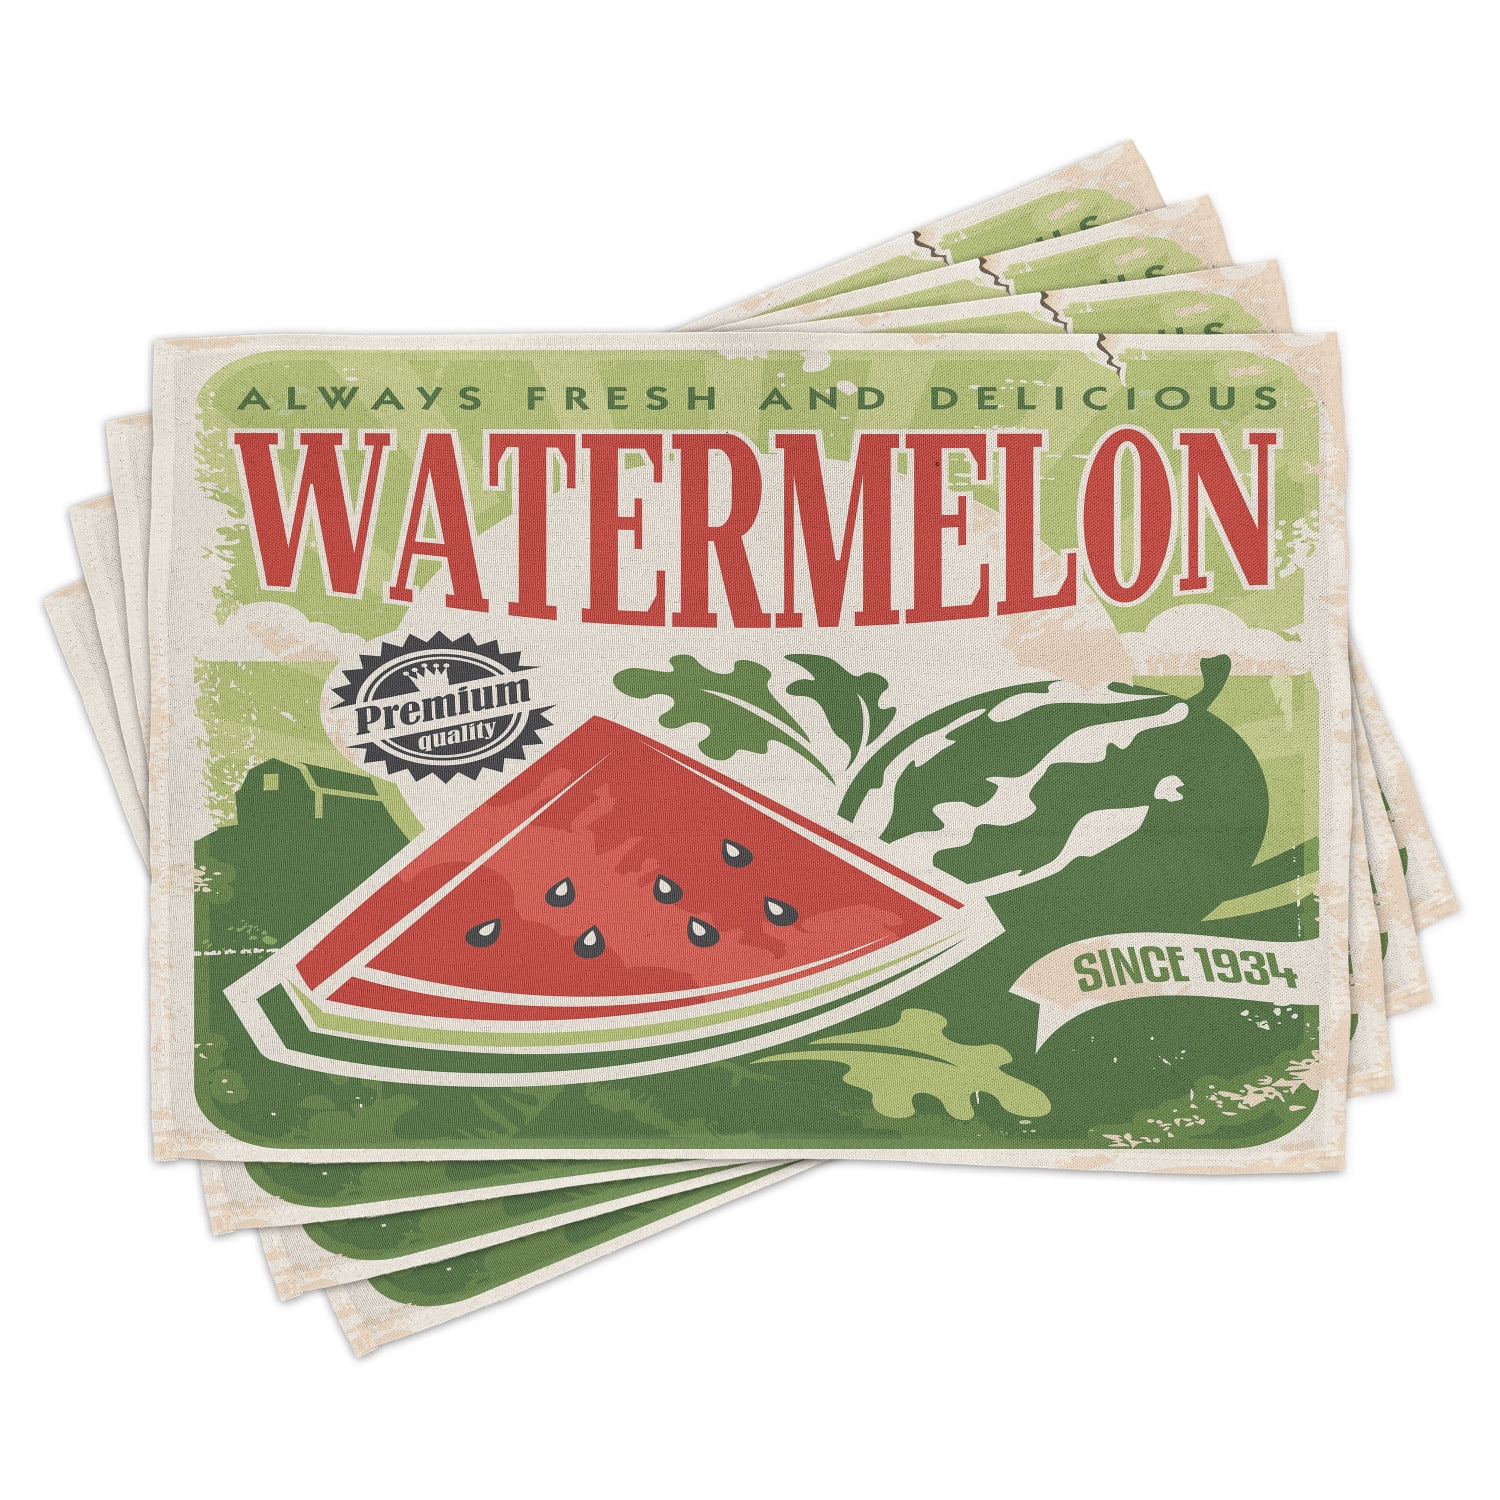 Watermelon Placemats Set of 4 Non Slip Burlap Table Mats Heat Resistant Washable Place Mats for Dining Home Kitchen 12 x 18 Inch 